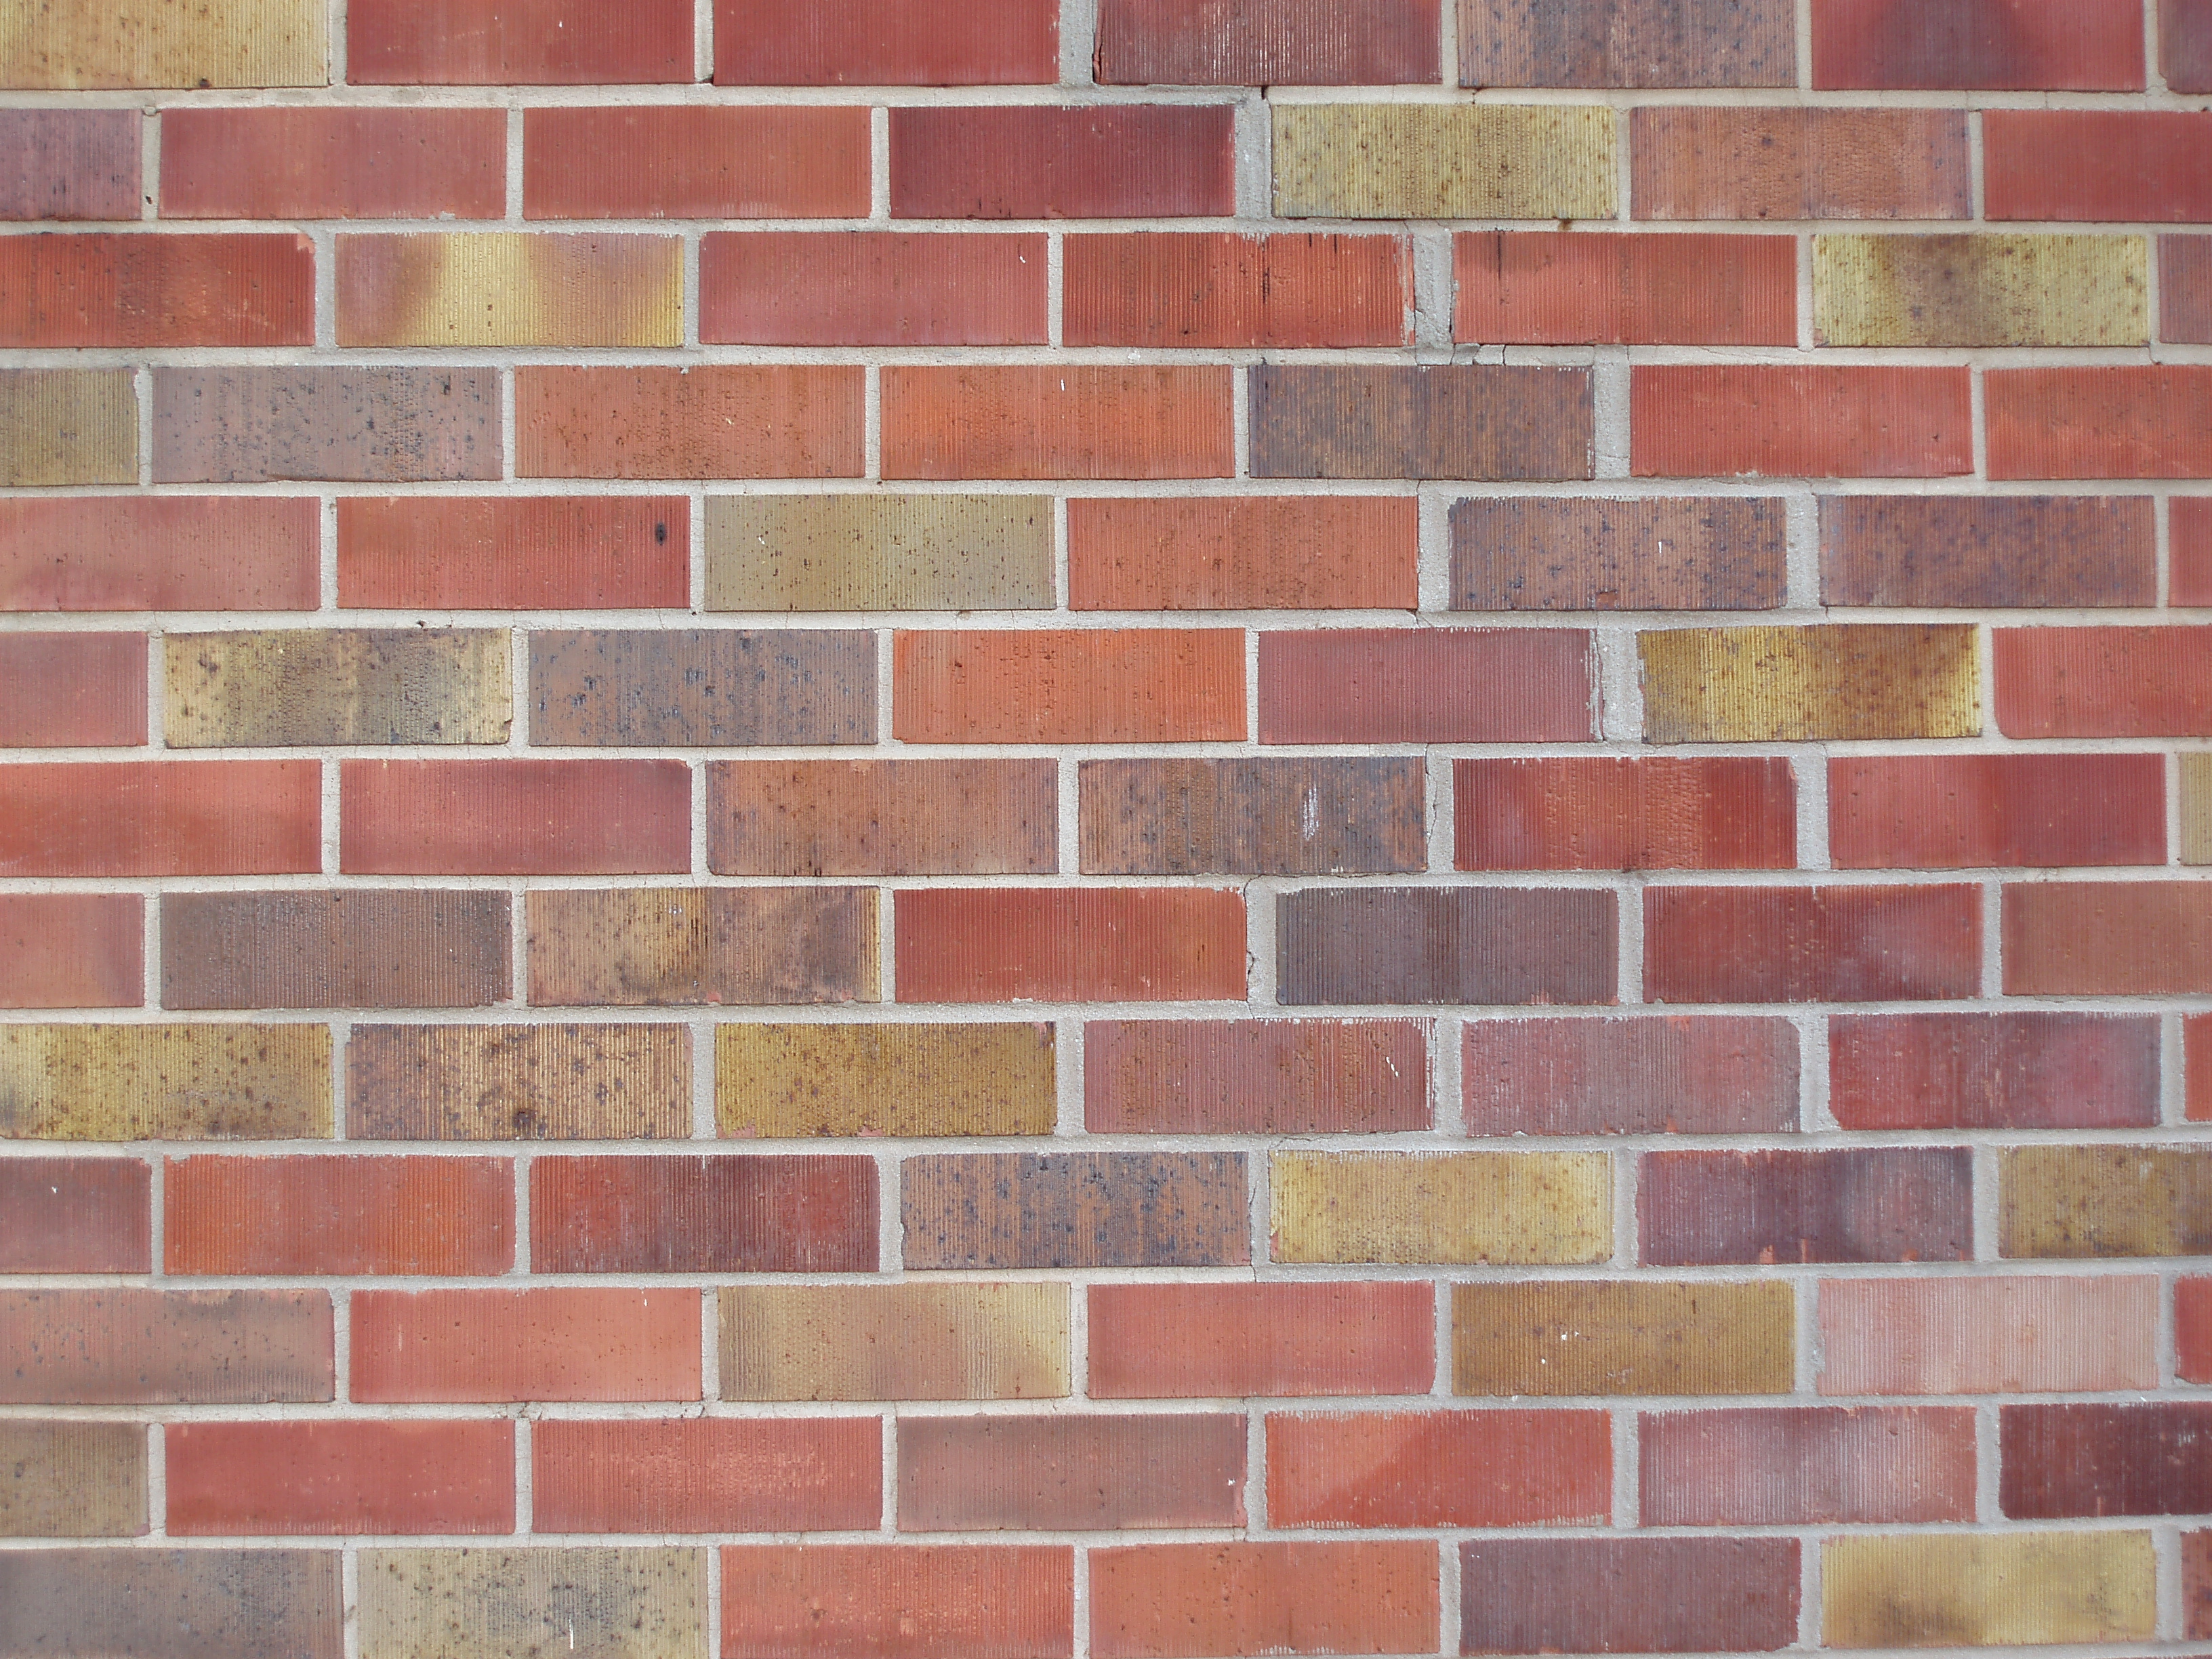 horizontal brick wall | Free backgrounds and textures | Cr103.com